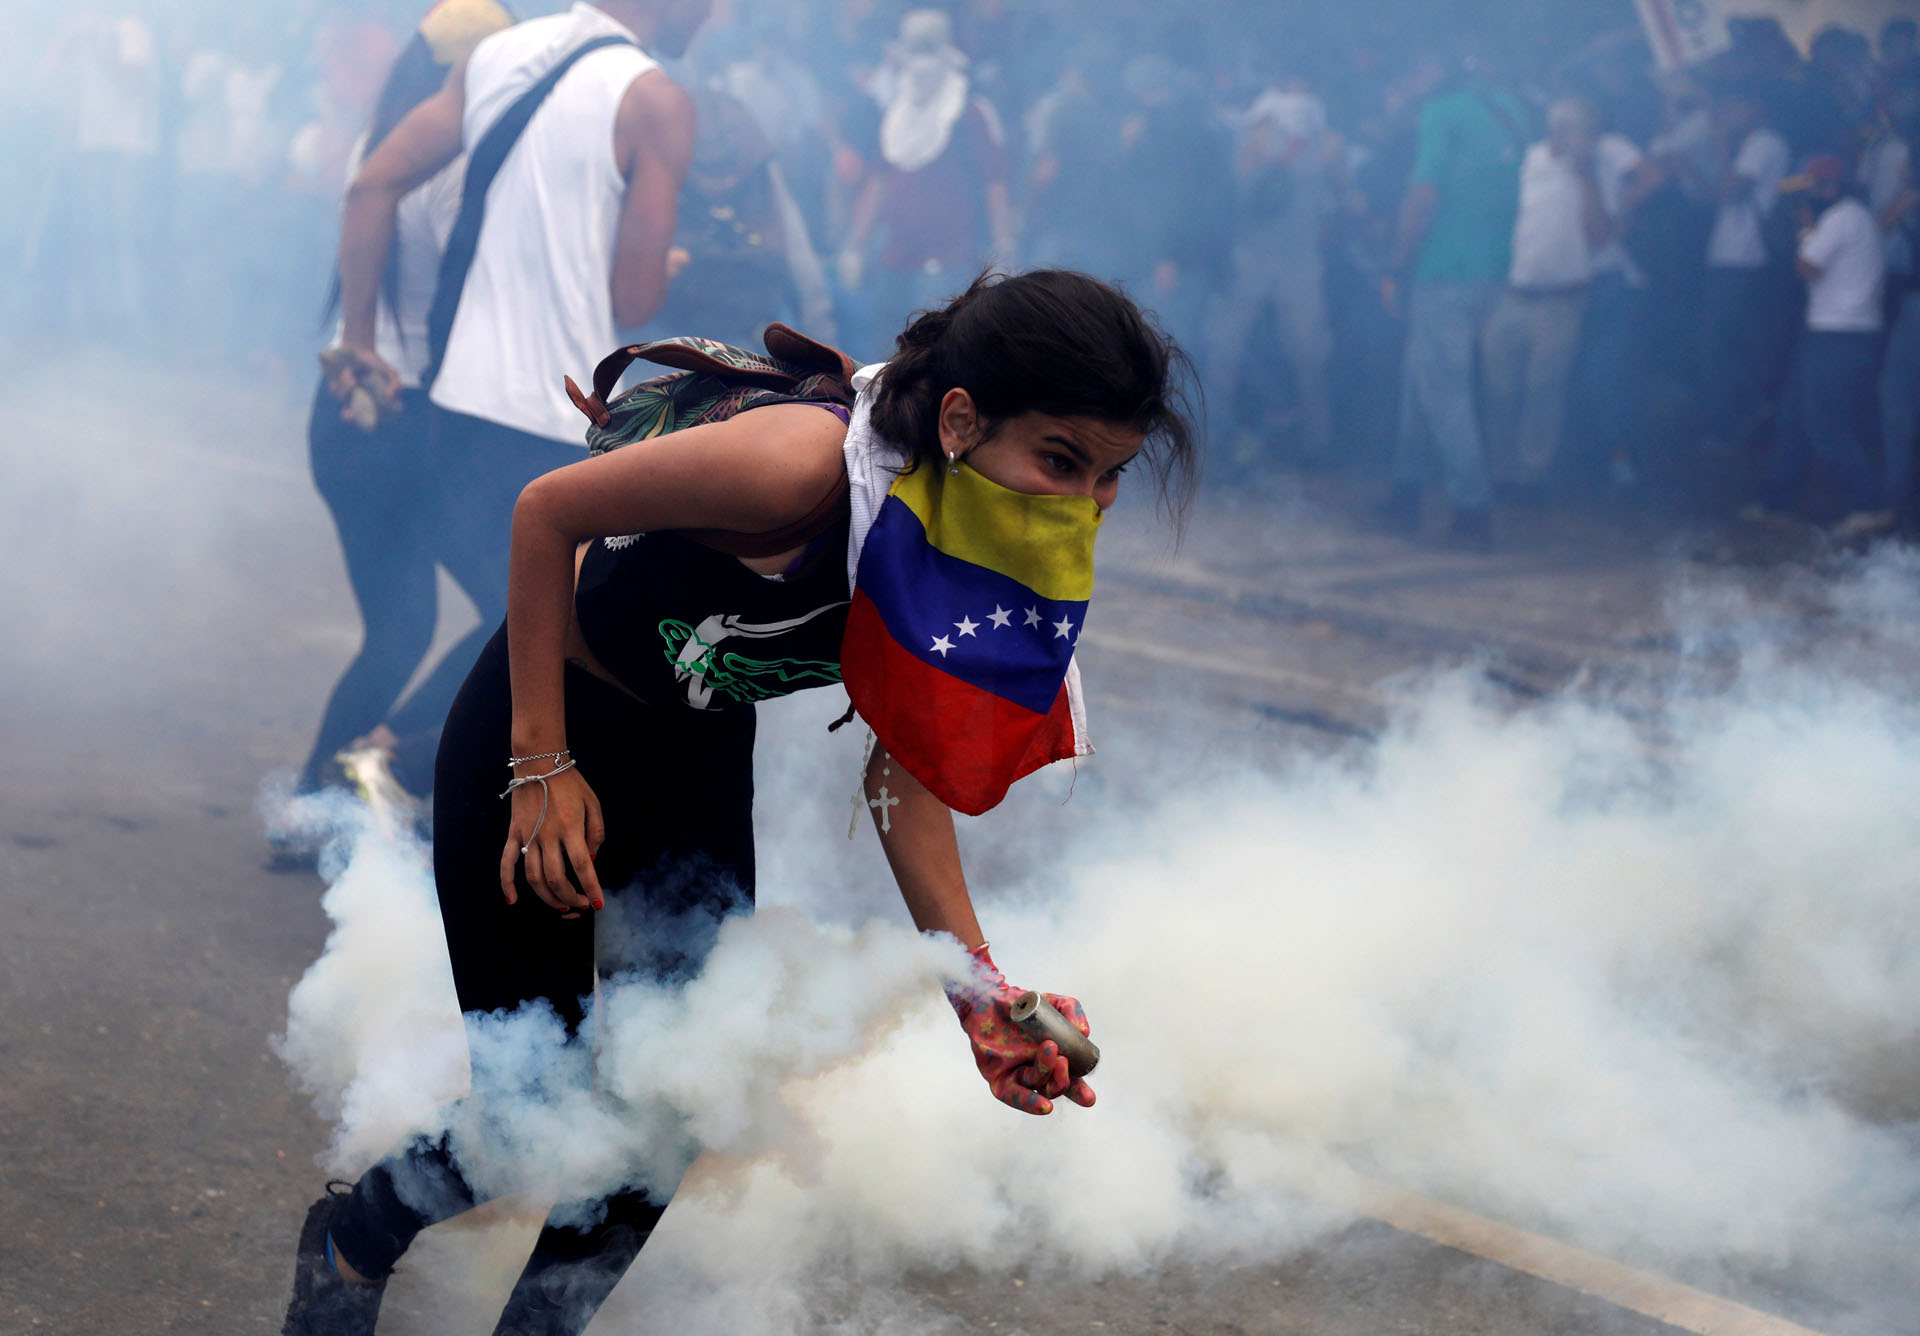 A demonstrator picks up a tear gas canister during clashes with security forces at an opposition rally in Caracas, Venezuela, April 6, 2017. REUTERS/Carlos Garcia Rawlins